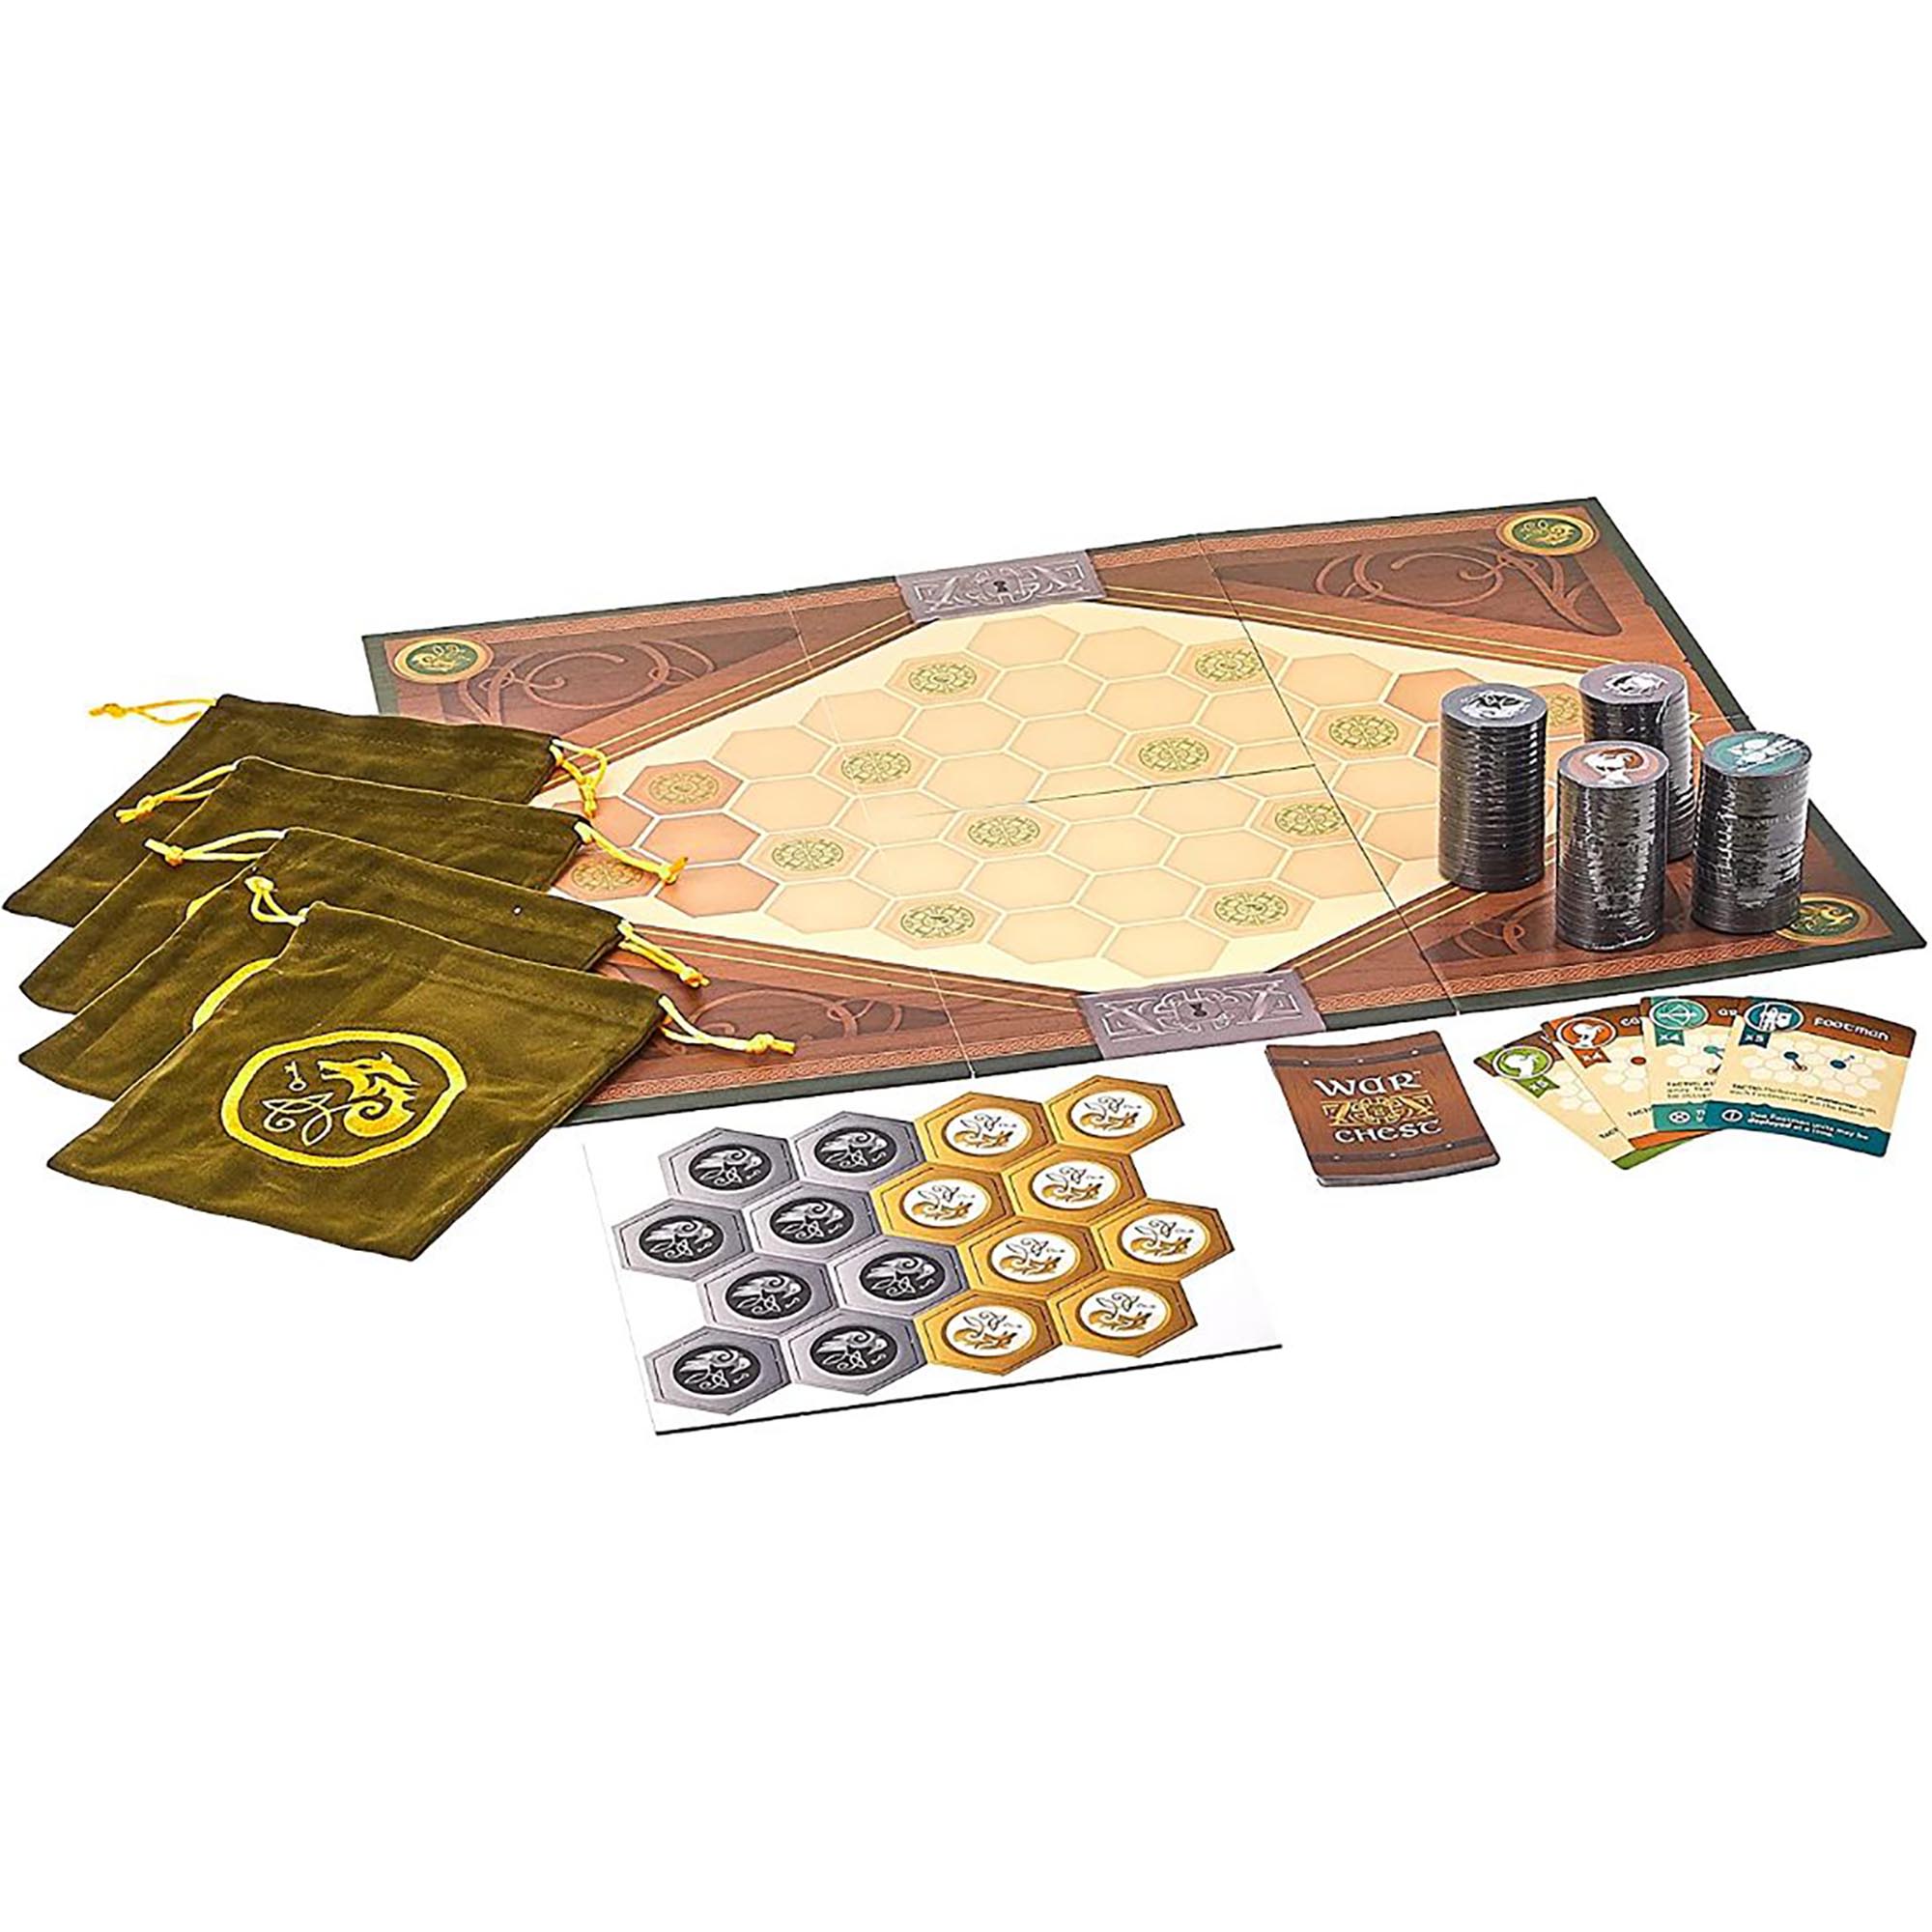 Alderac Entertainment Group: War Chest Army Strategy Board Game, Ages 14+, 2 or 4 Players, 30-60 Min - image 3 of 7